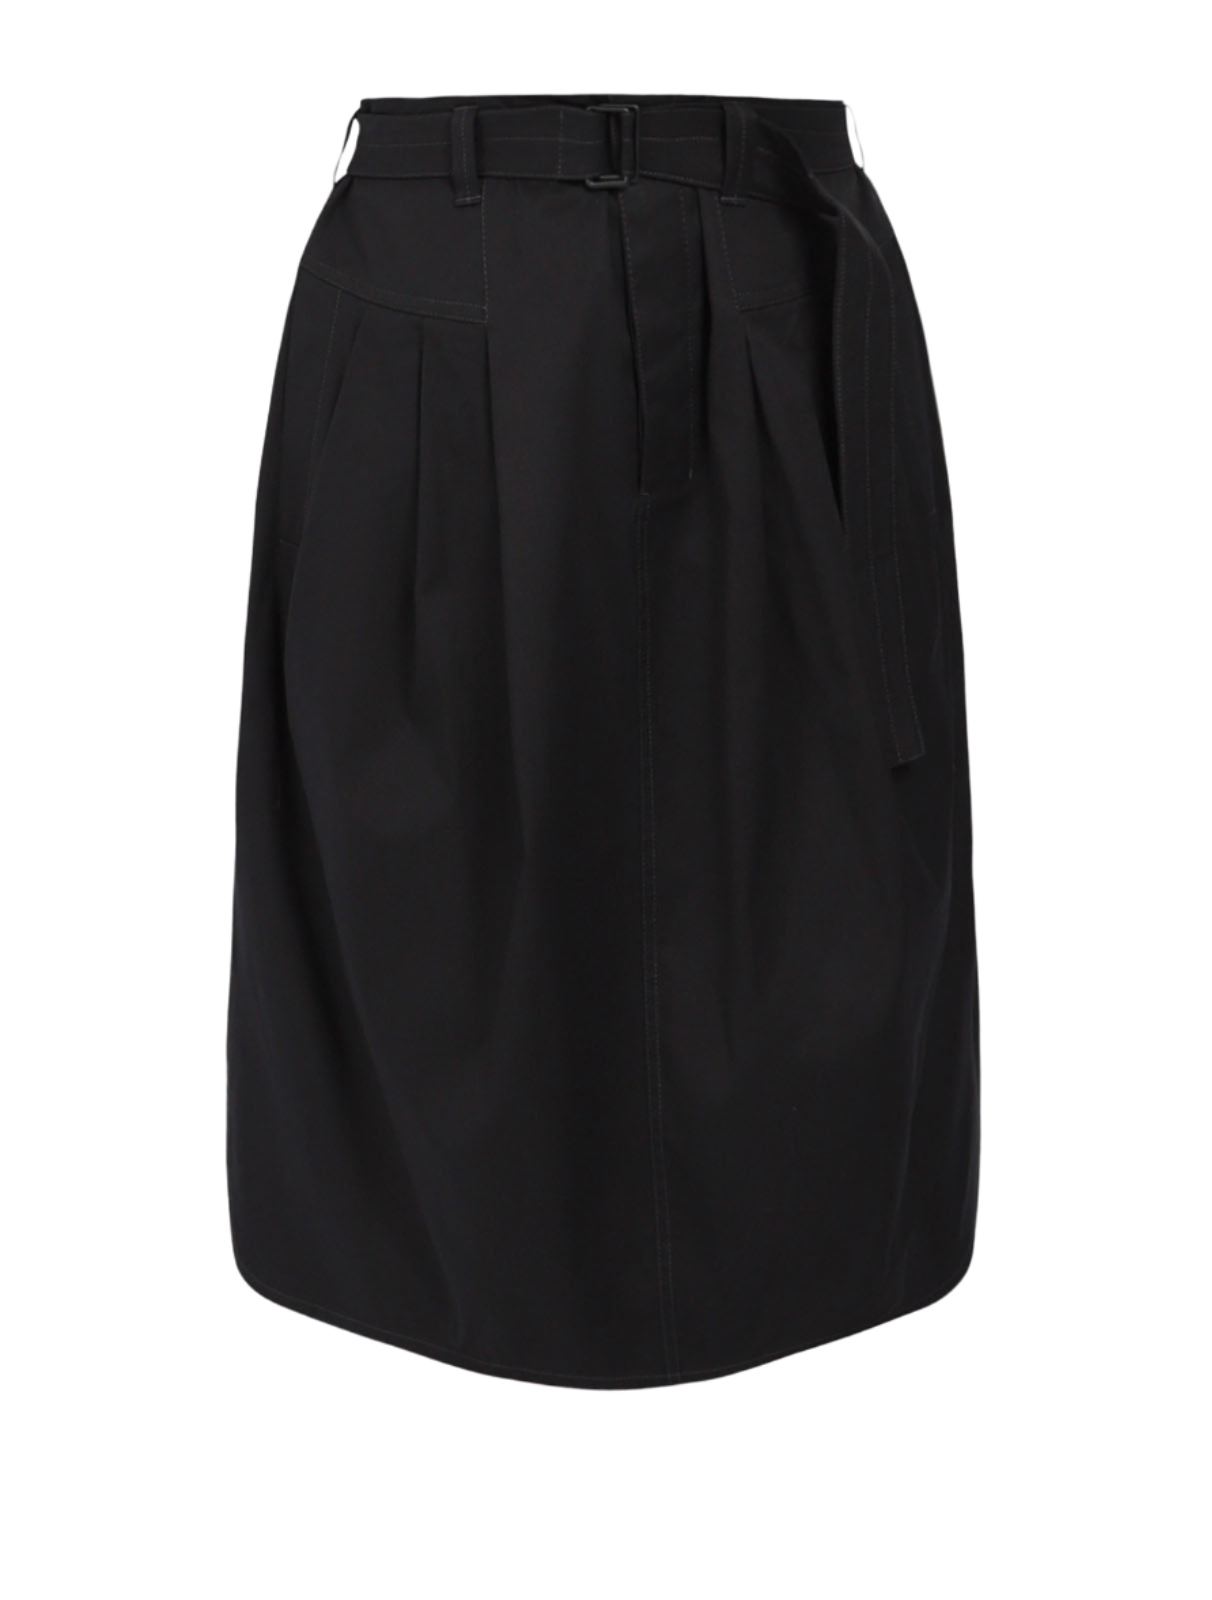 Pleat Belted Skirt